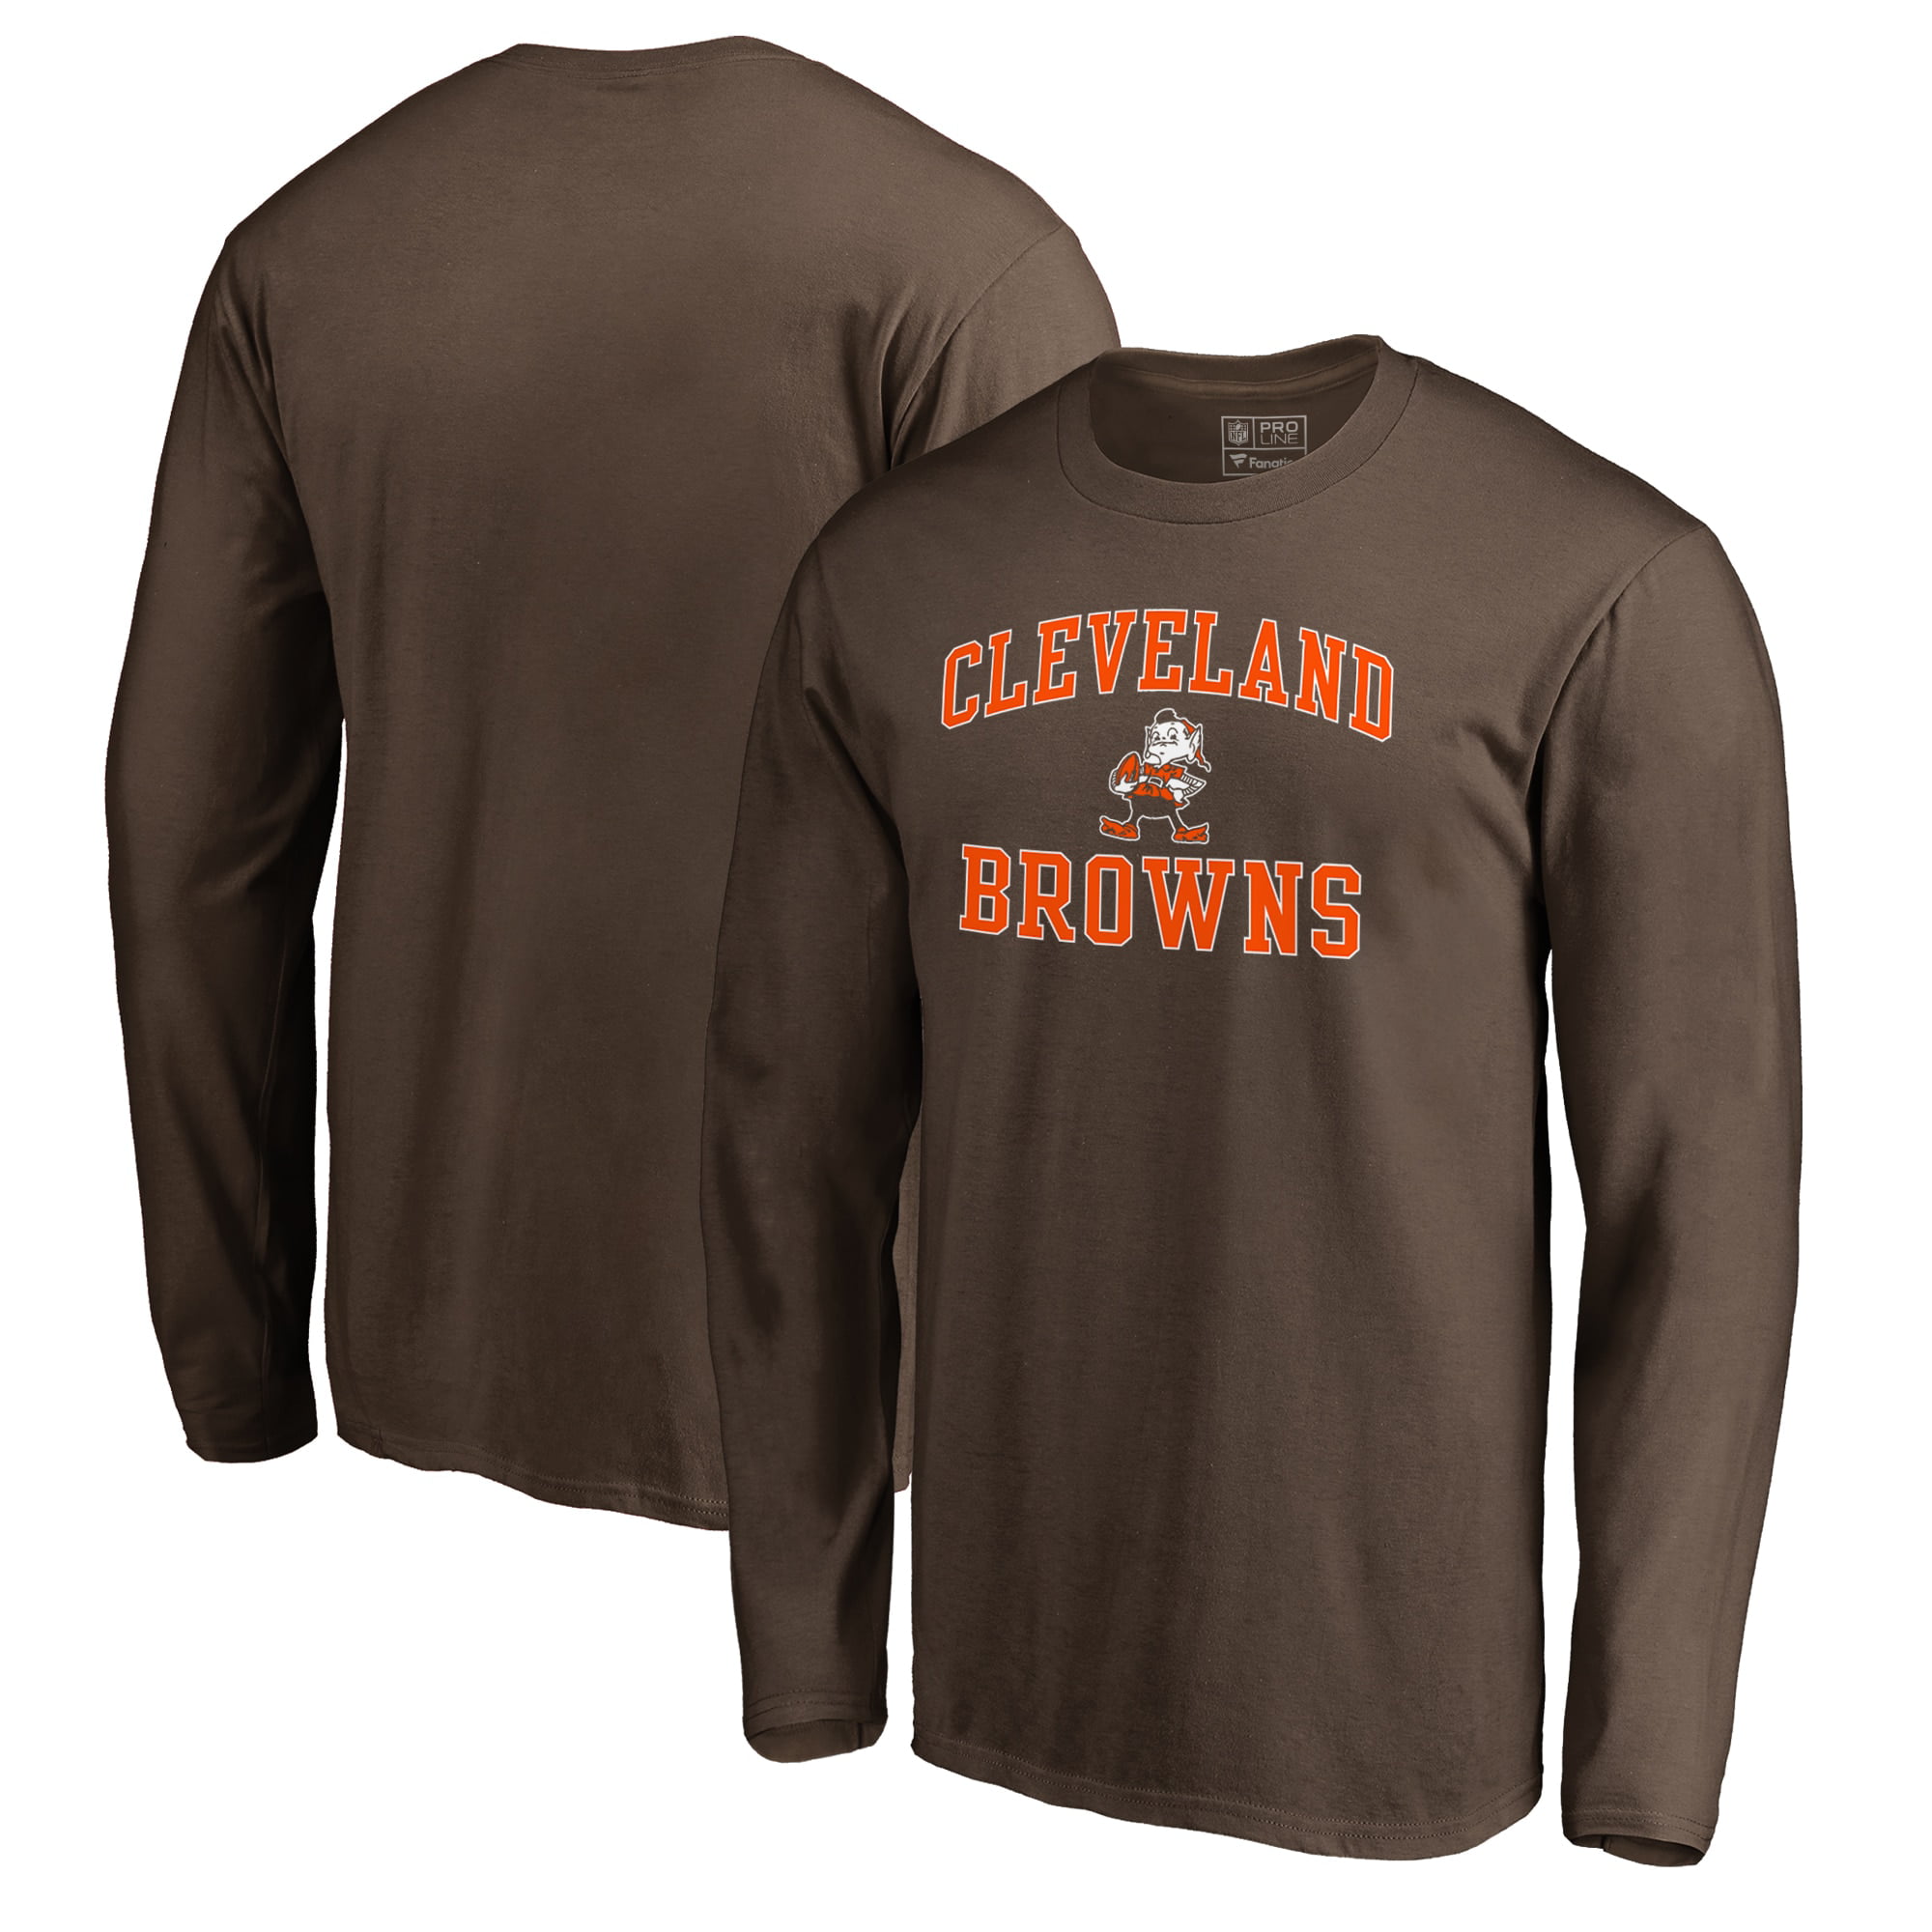 US Football Cleveland Browns T-Shirts Mens Short Sleeve Tee Workout Top S-5XL